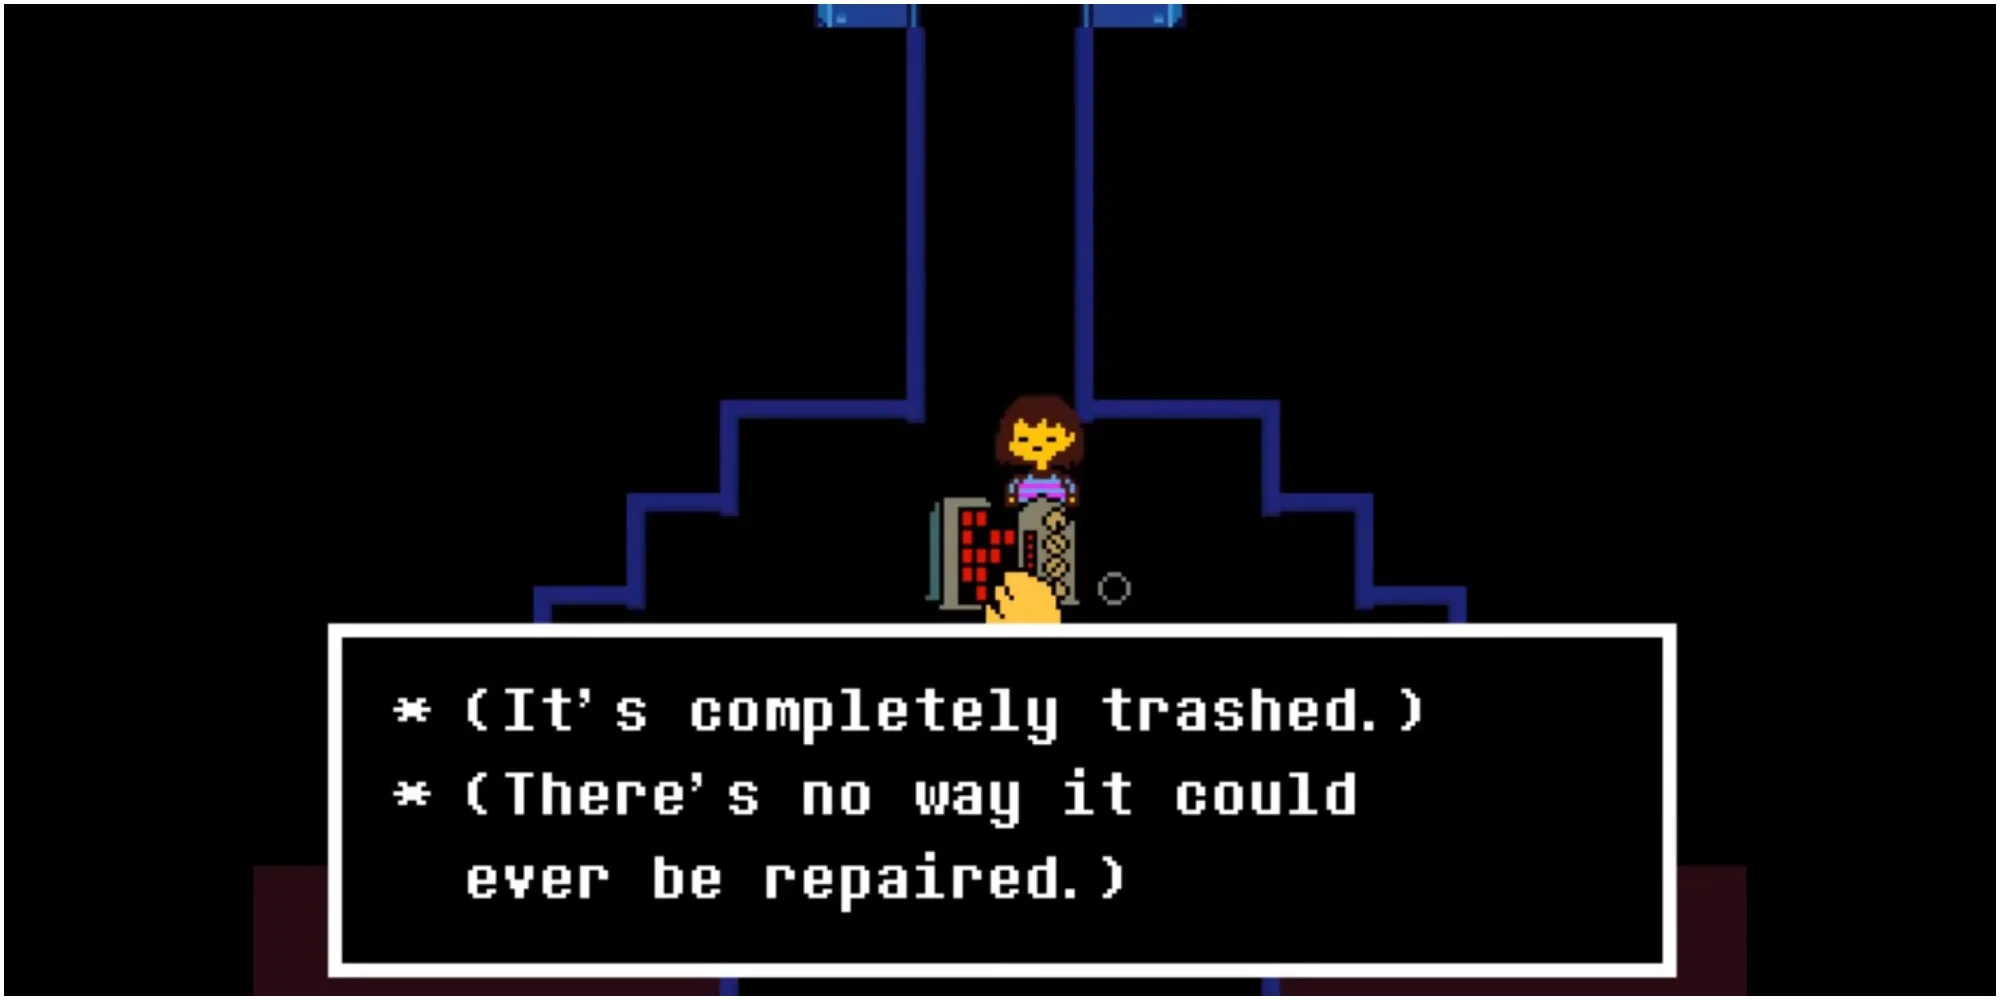 Alphys examining Mettaton’s broken body while Chara is interacting with it.